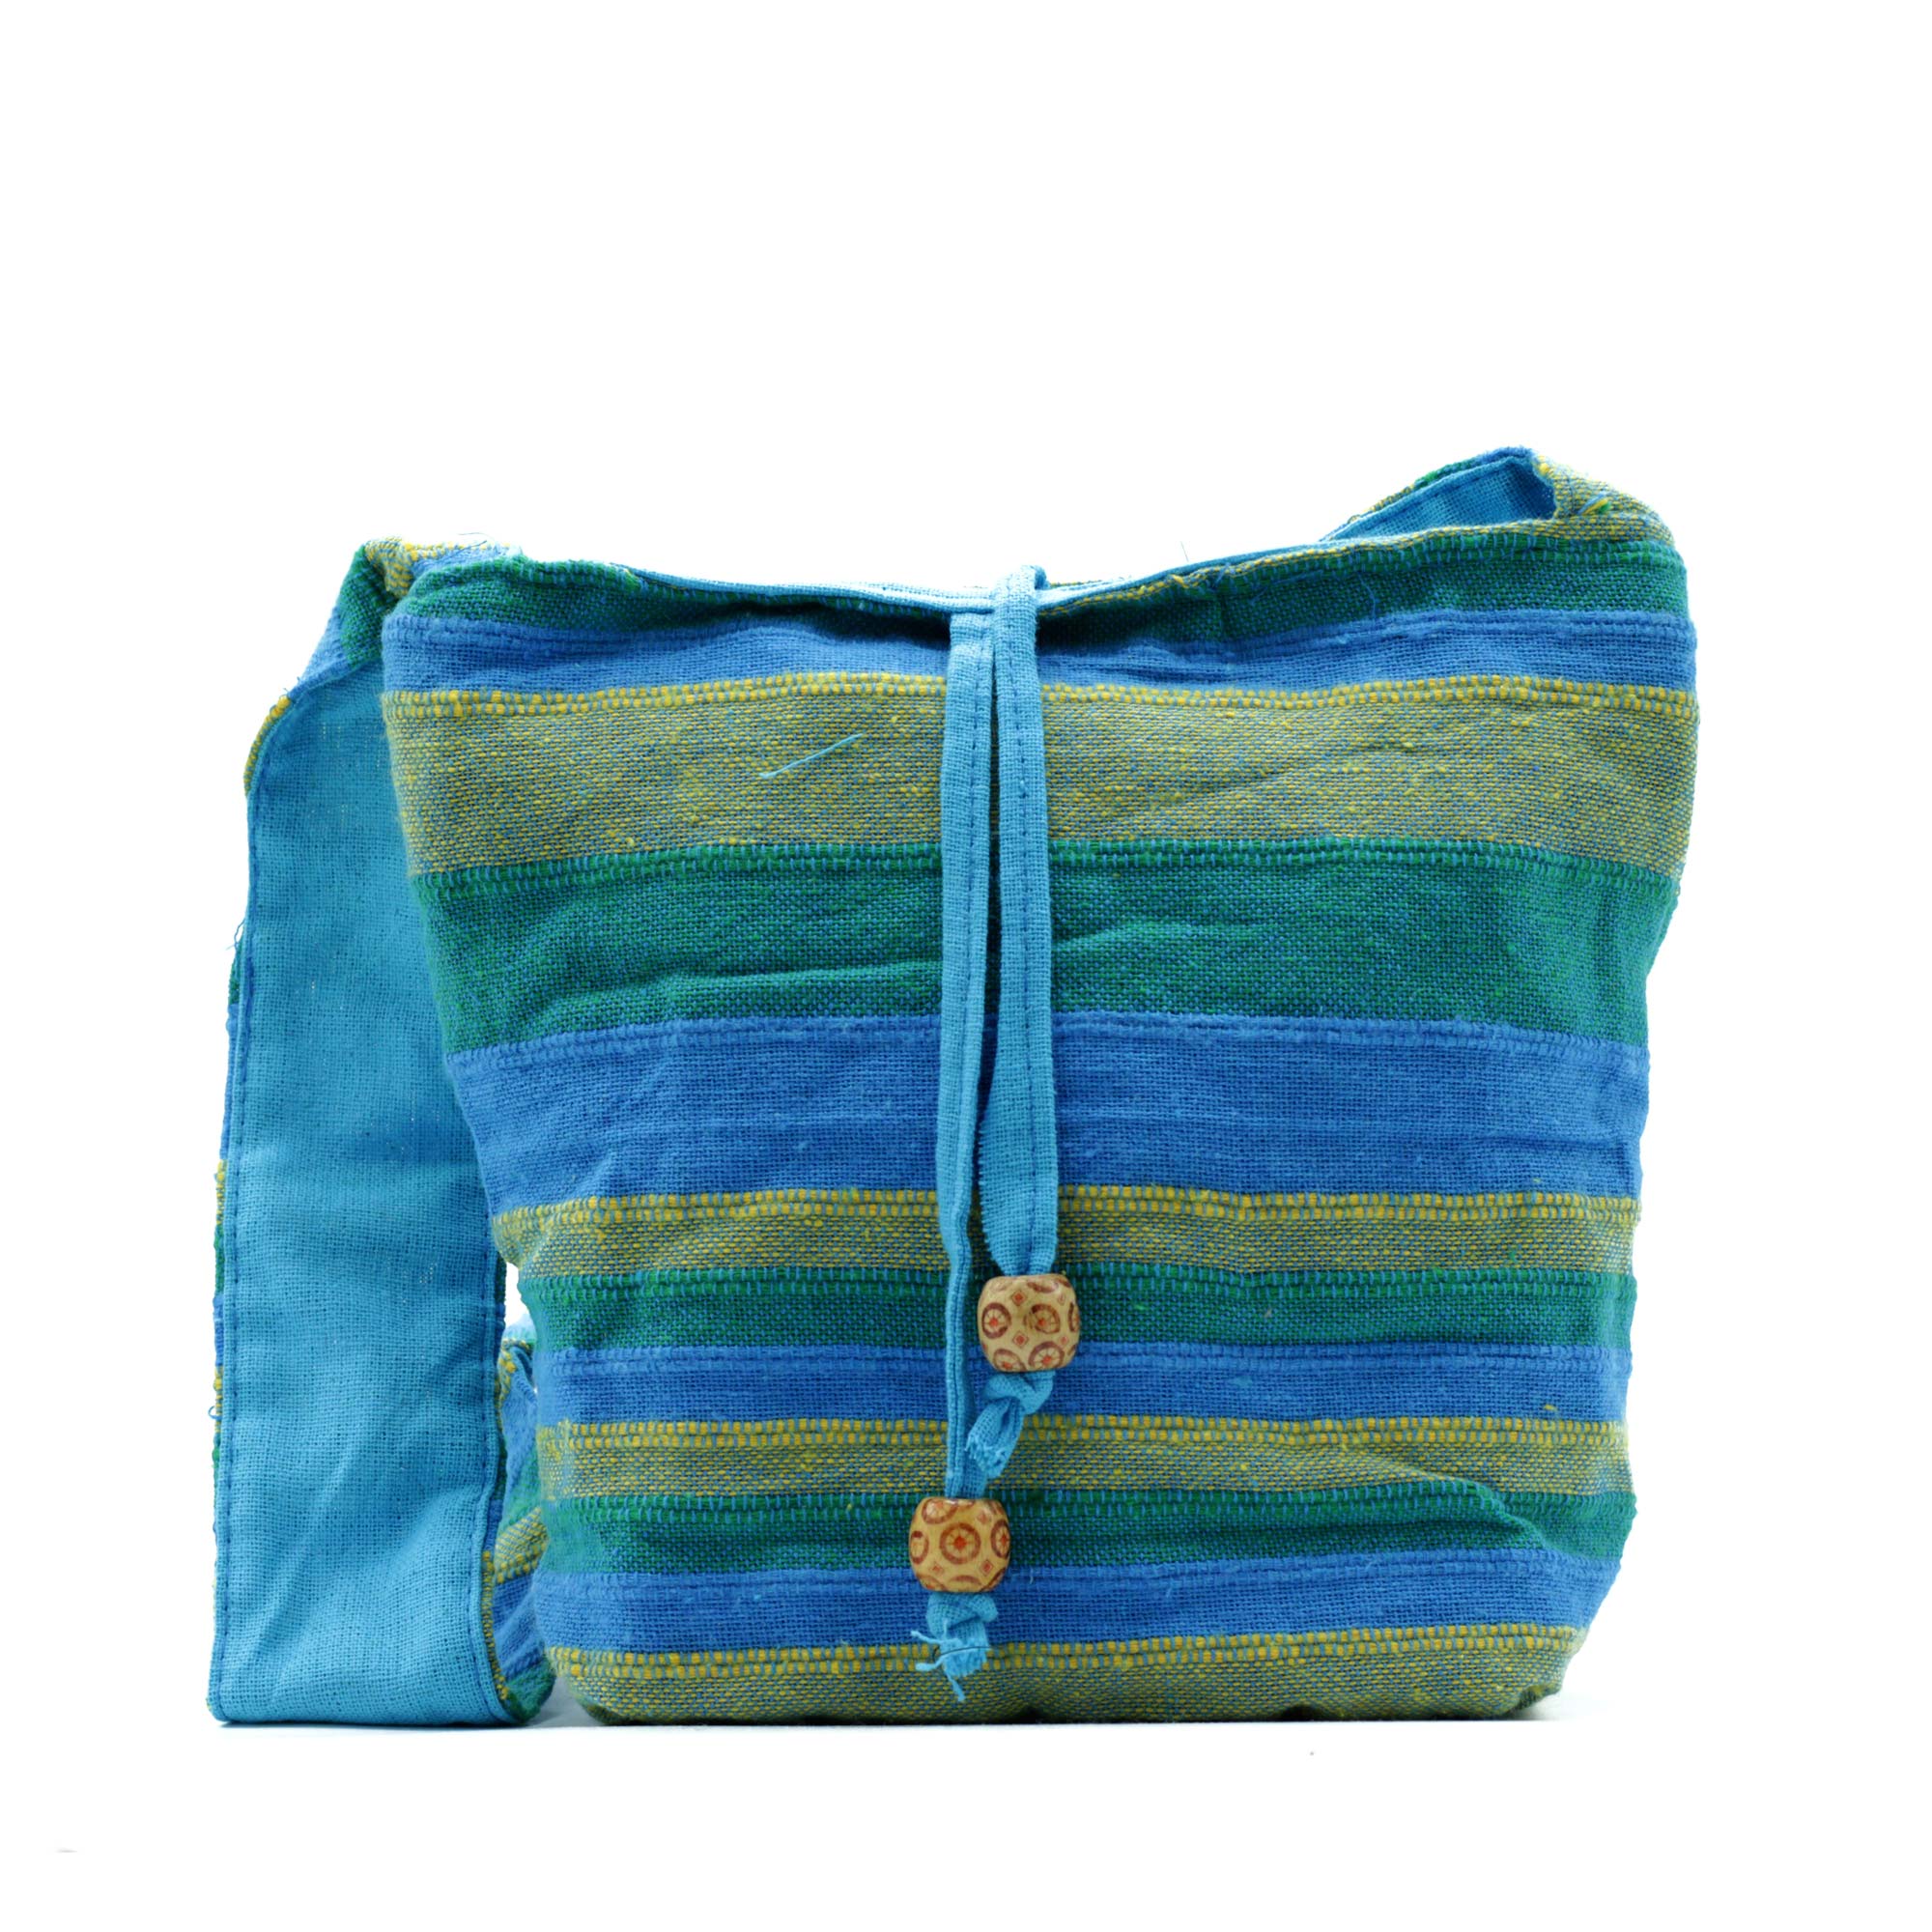 View Nepal Sling Bag Spring Meadows Green Blue information